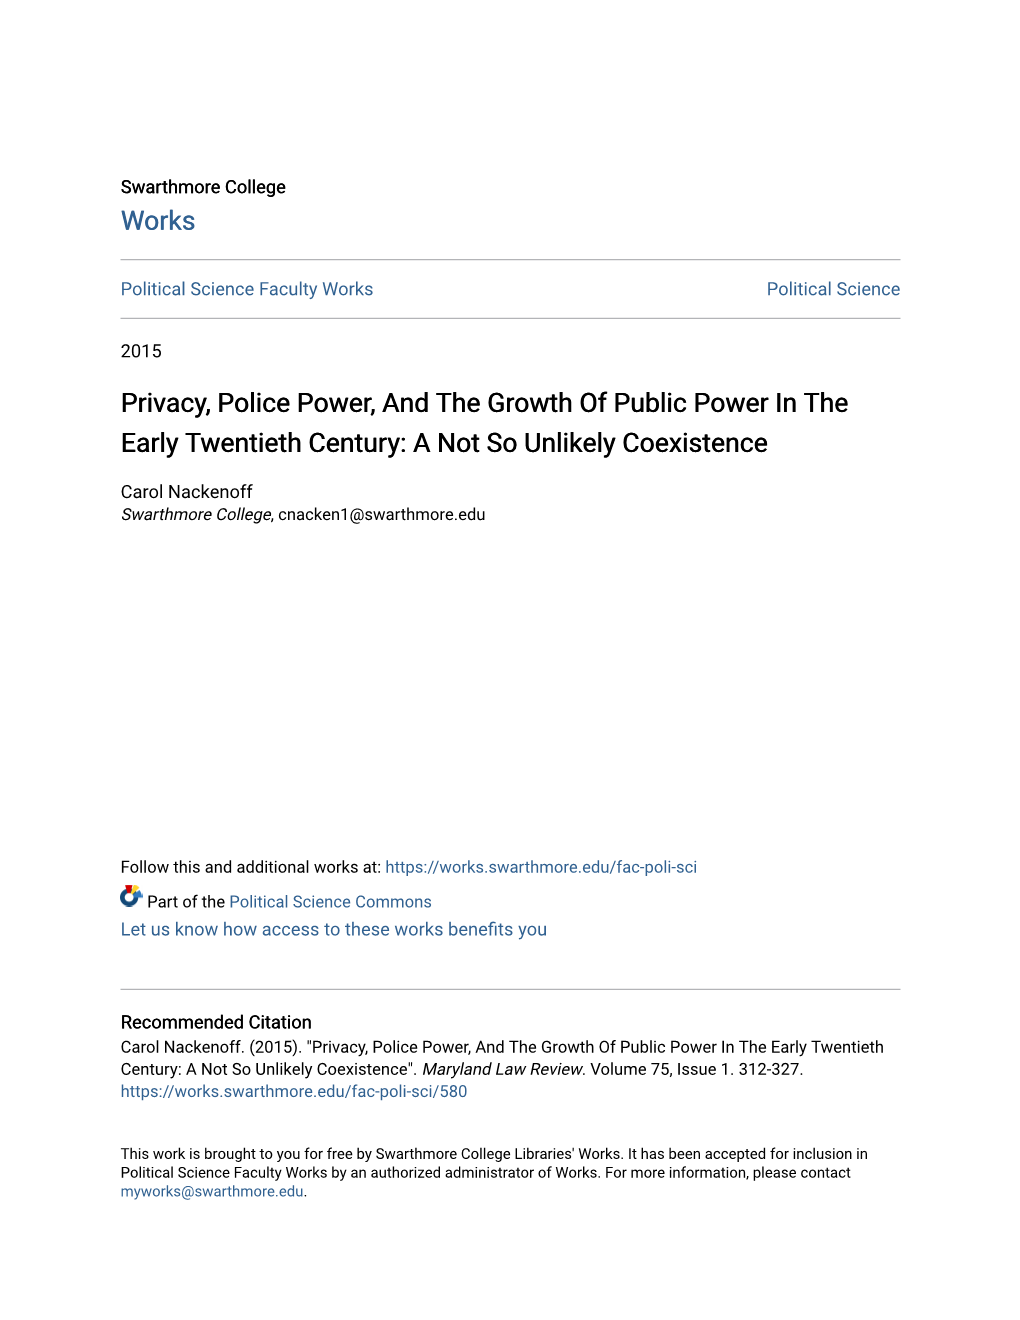 Privacy, Police Power, and the Growth of Public Power in the Early Twentieth Century: a Not So Unlikely Coexistence